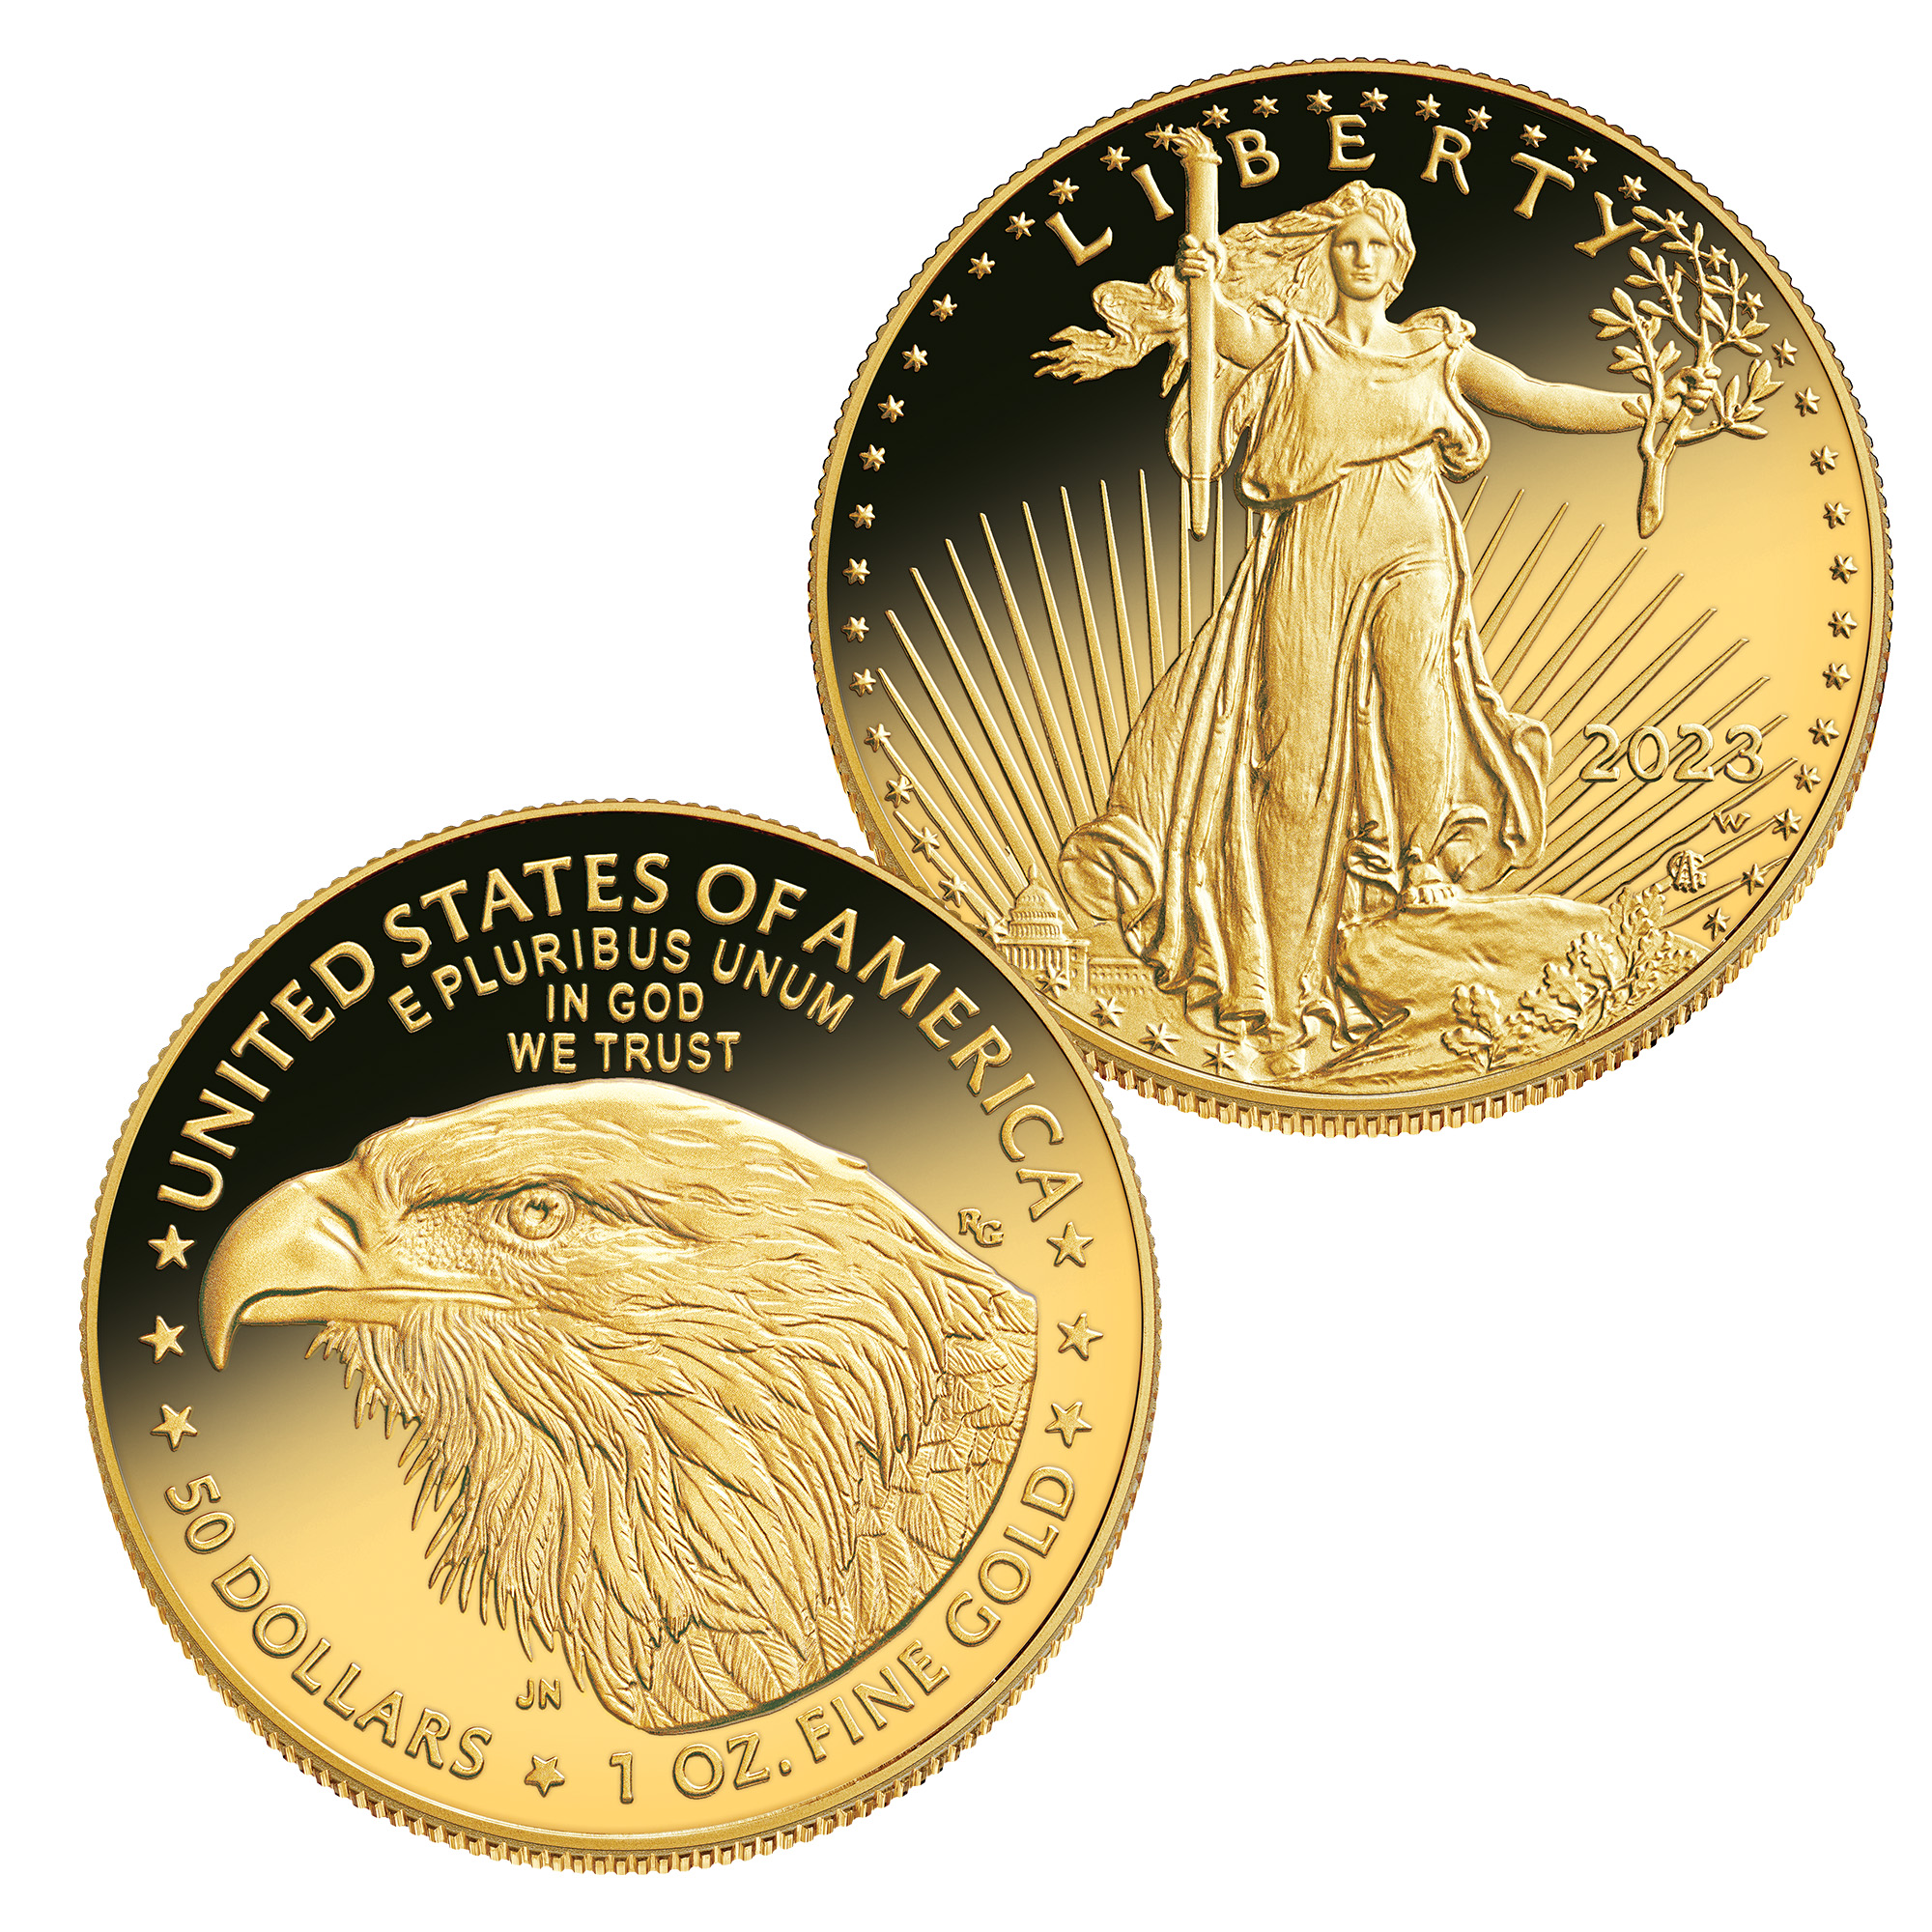 https://www.pcscoins.com/on/demandware.static/-/Sites-full-catalog/default/dw9f0d1f8d/images/hi-res/2023-early-issue-proof-us-gold-coins_G23_a_Main.jpg